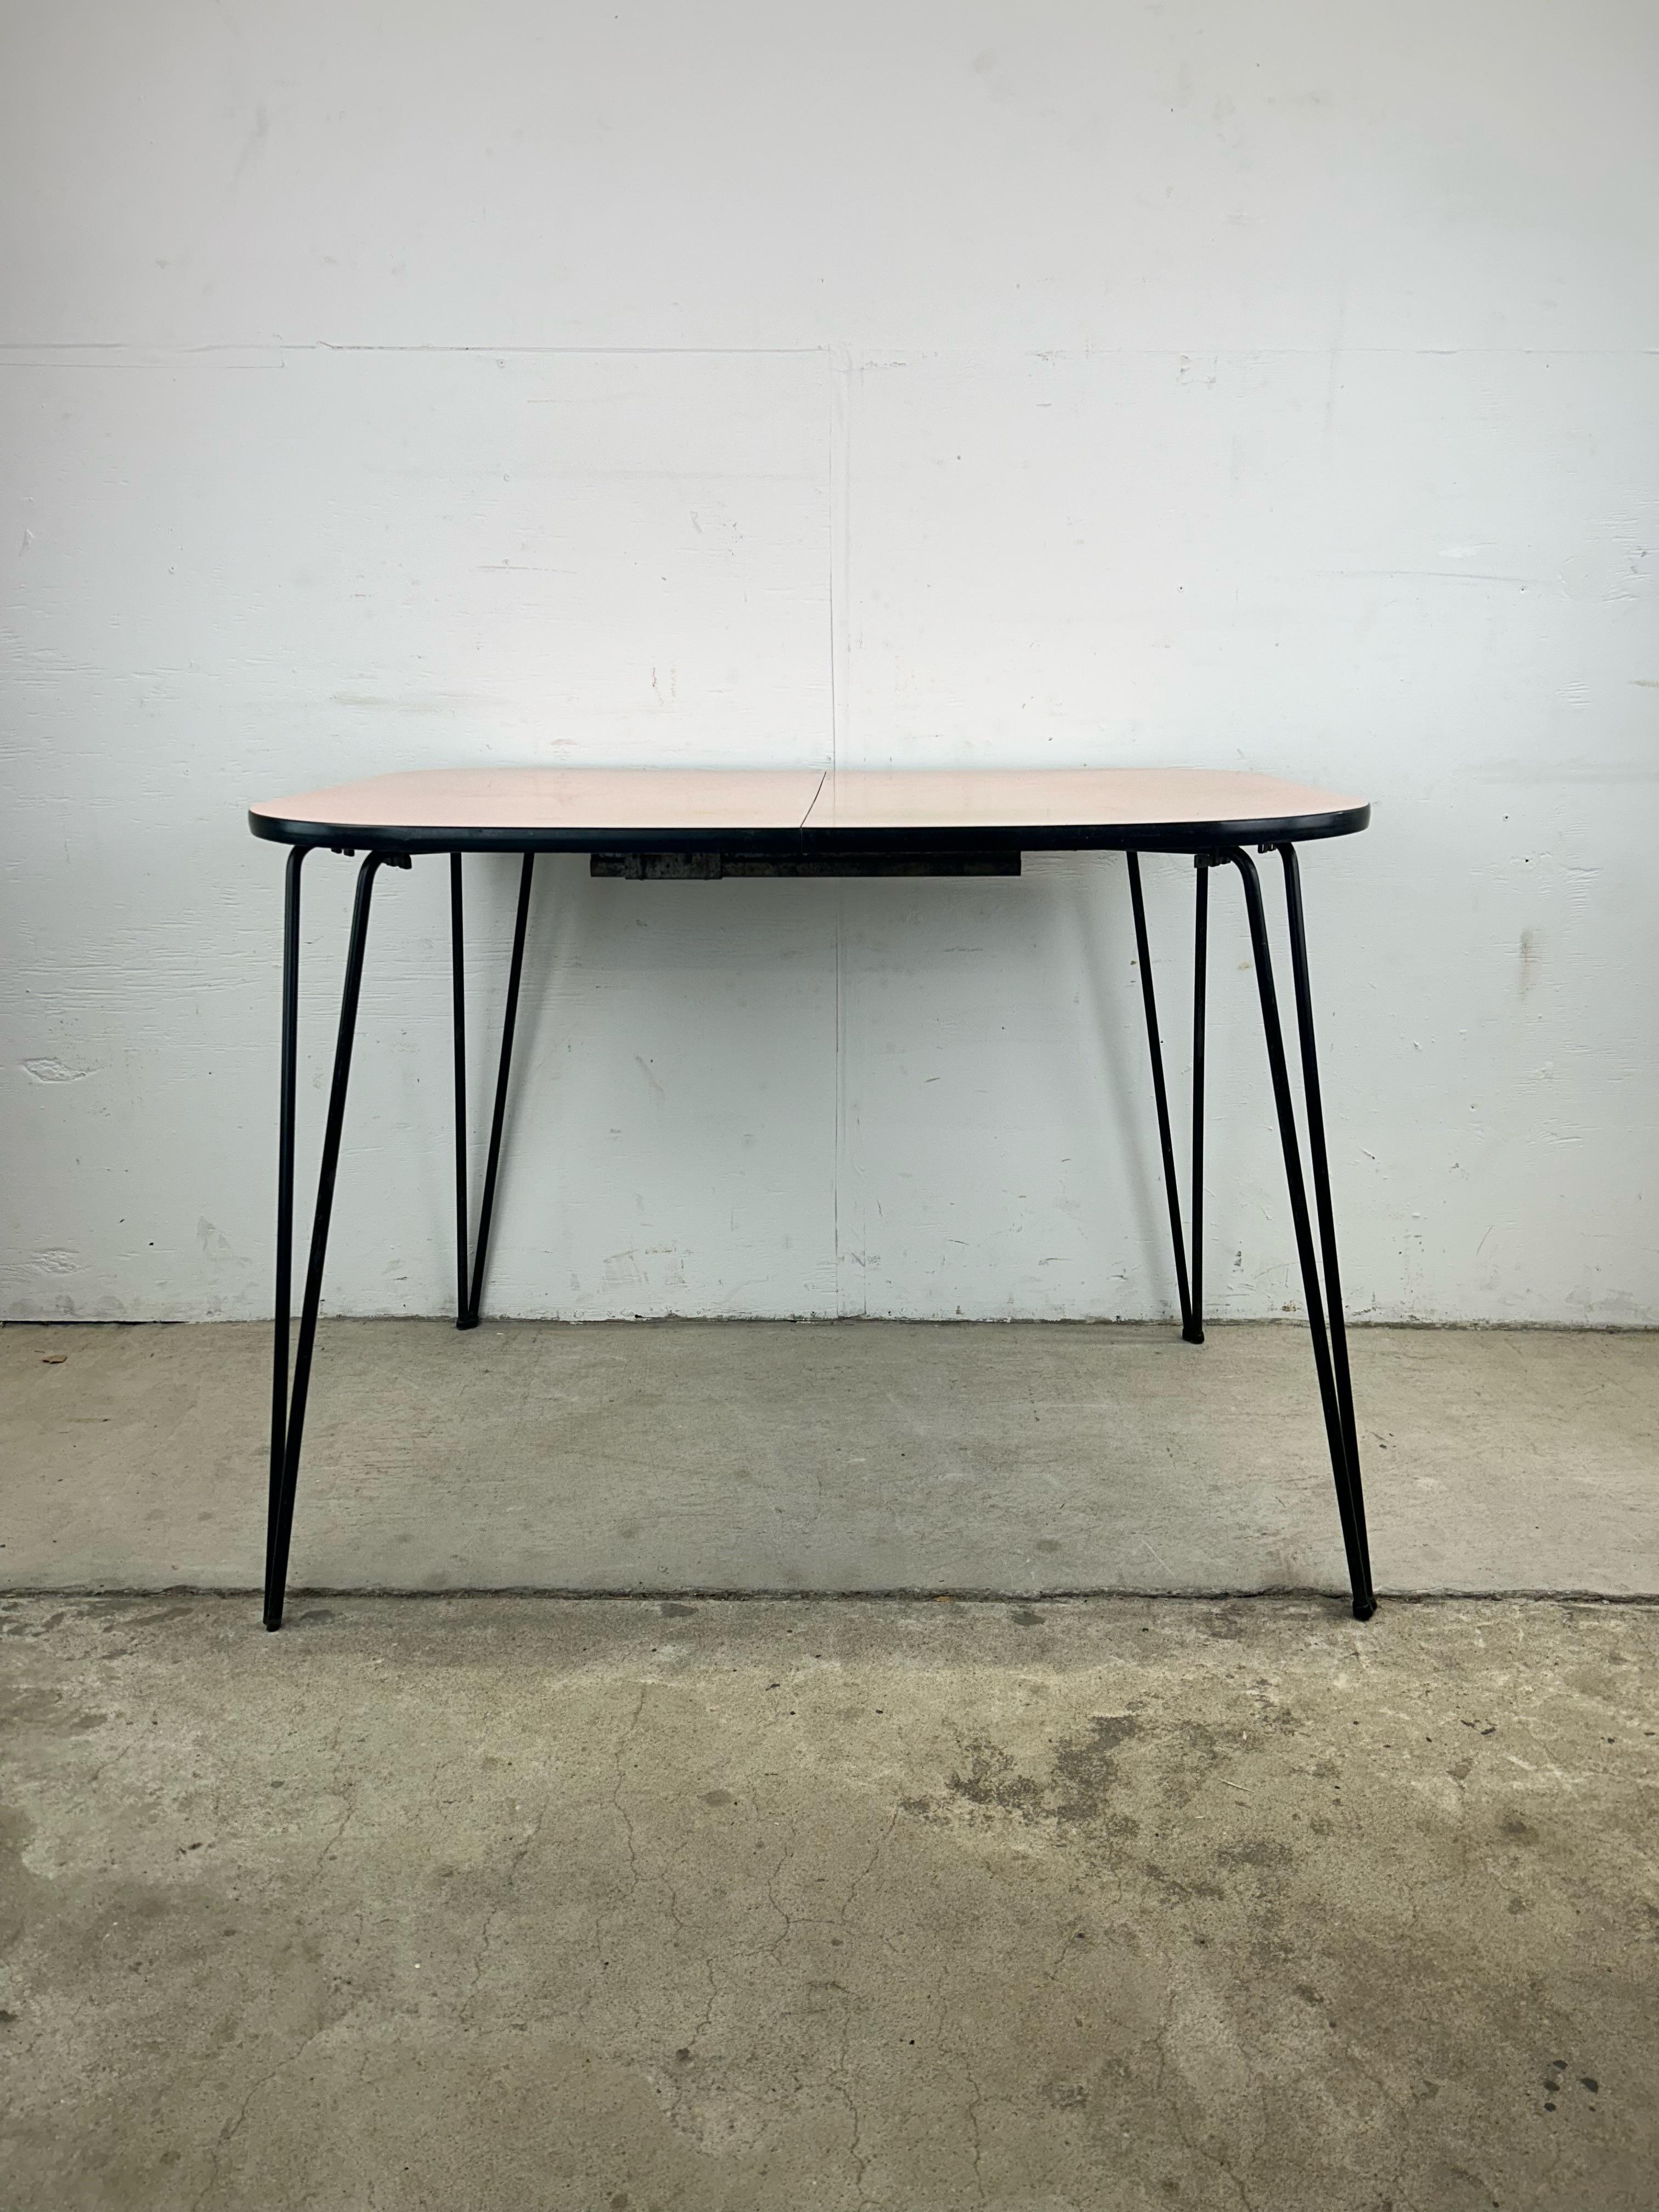 This mid century modern kitchenette table features formica construction, pink and white finish with some fading on the surface, black metal hairpin legs and one leaf.  This is your quintessential 1950s diner table.

Table with leaf measures 47.25w. 